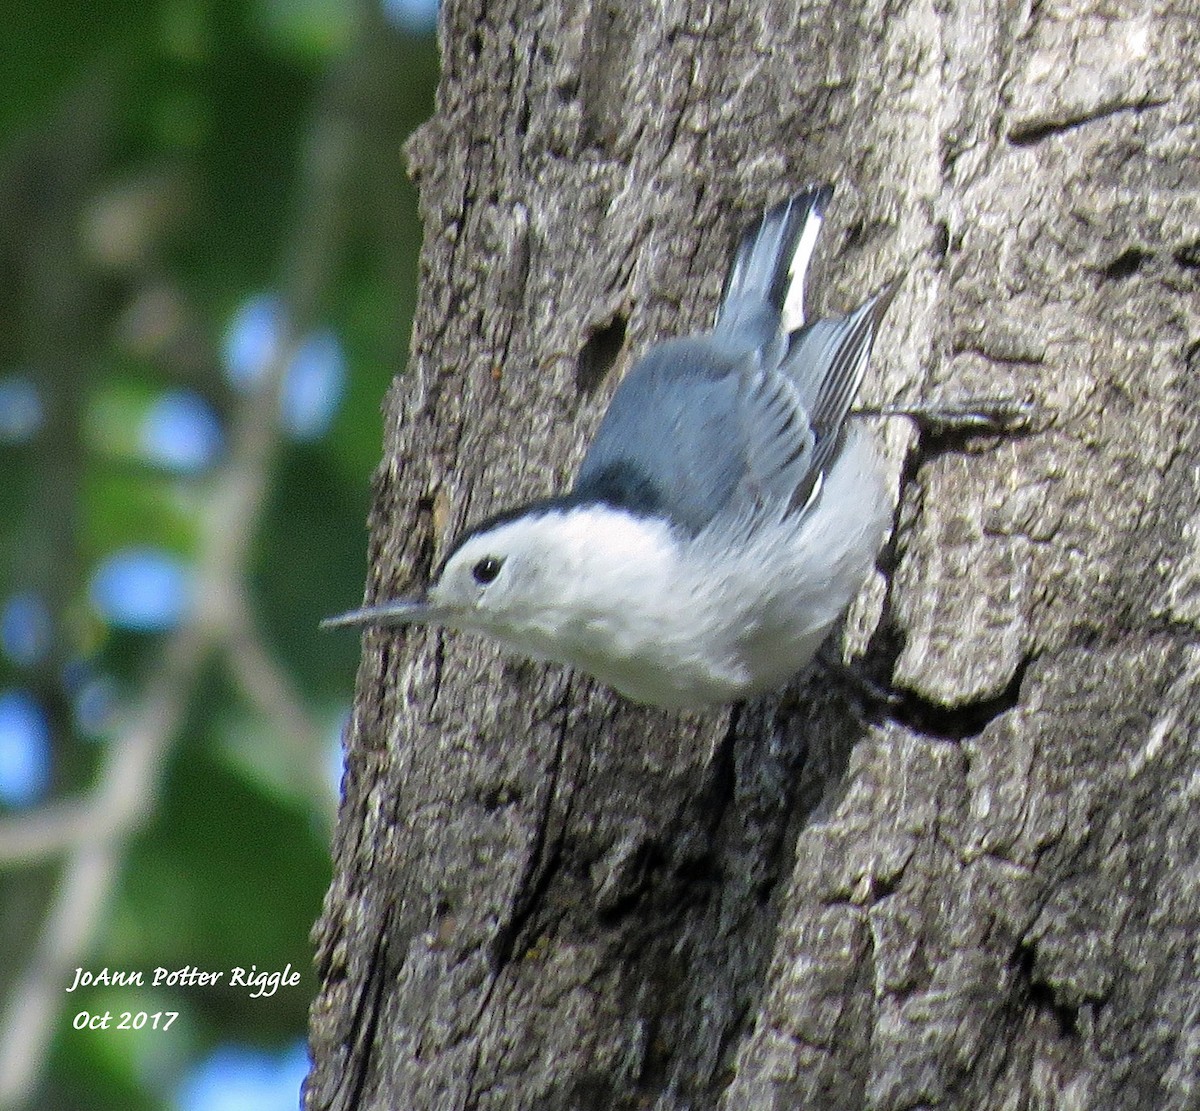 White-breasted Nuthatch - JoAnn Potter Riggle 🦤